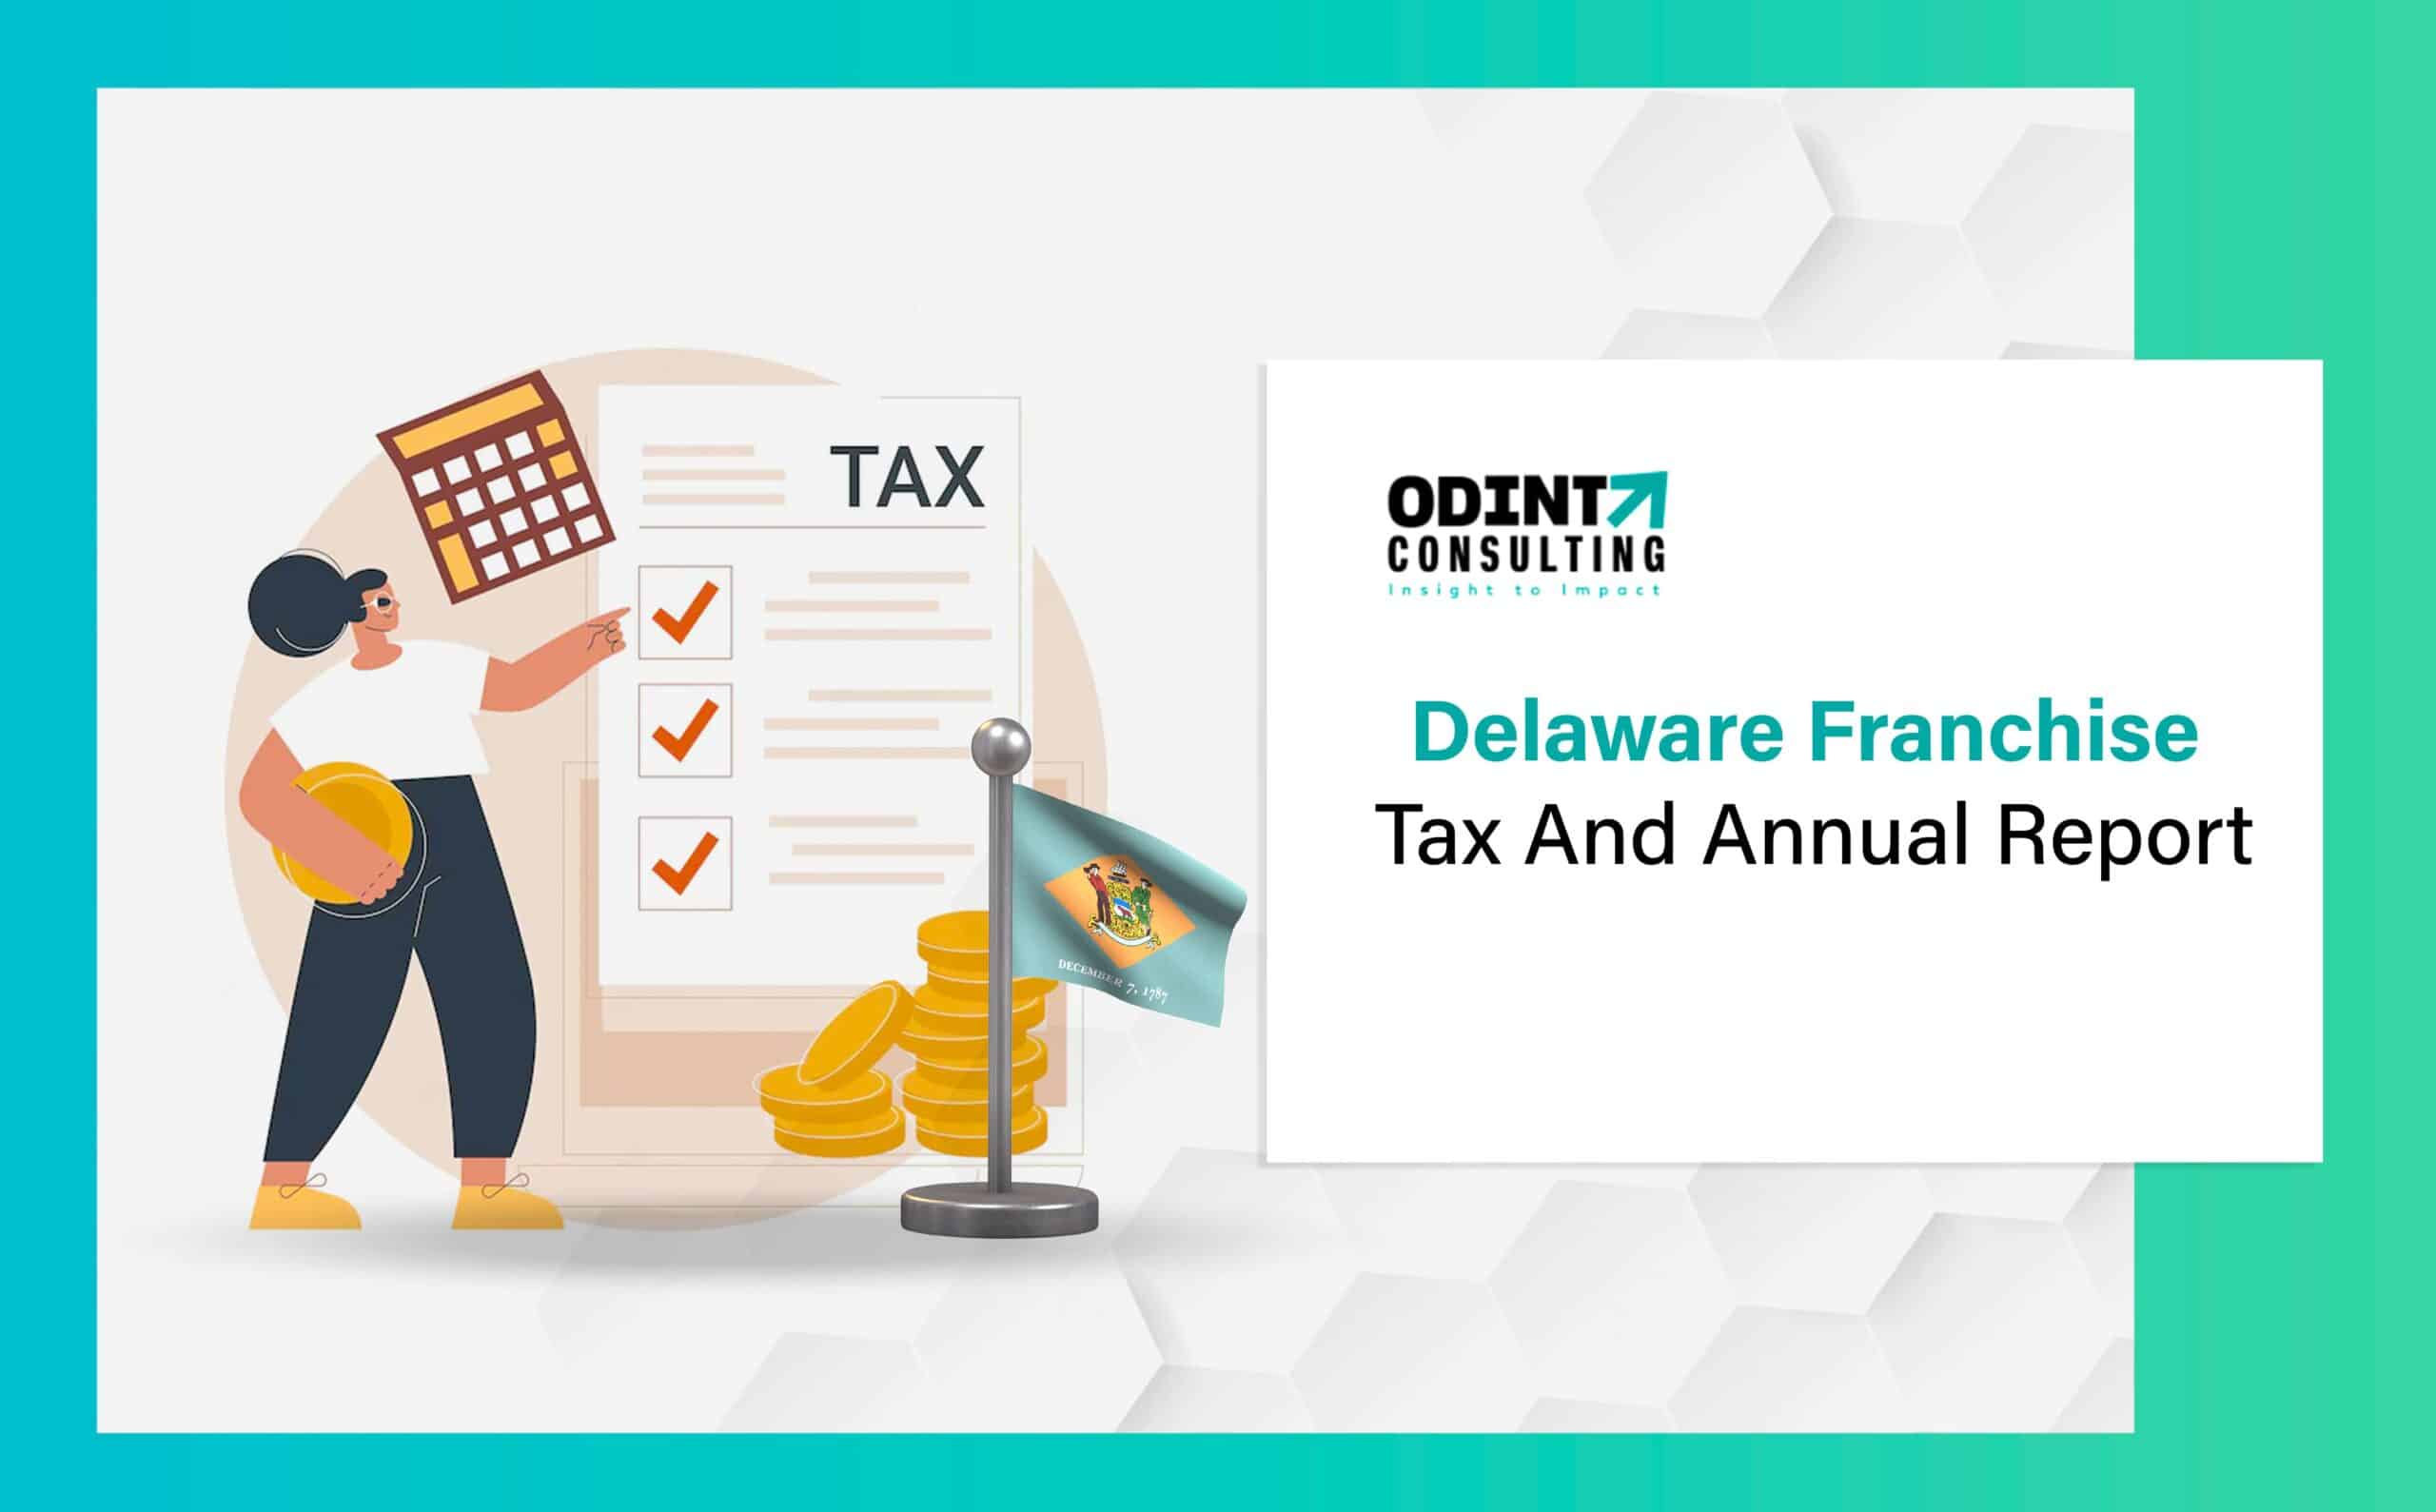 Delaware Franchise Tax And Annual Report: Complete Guide